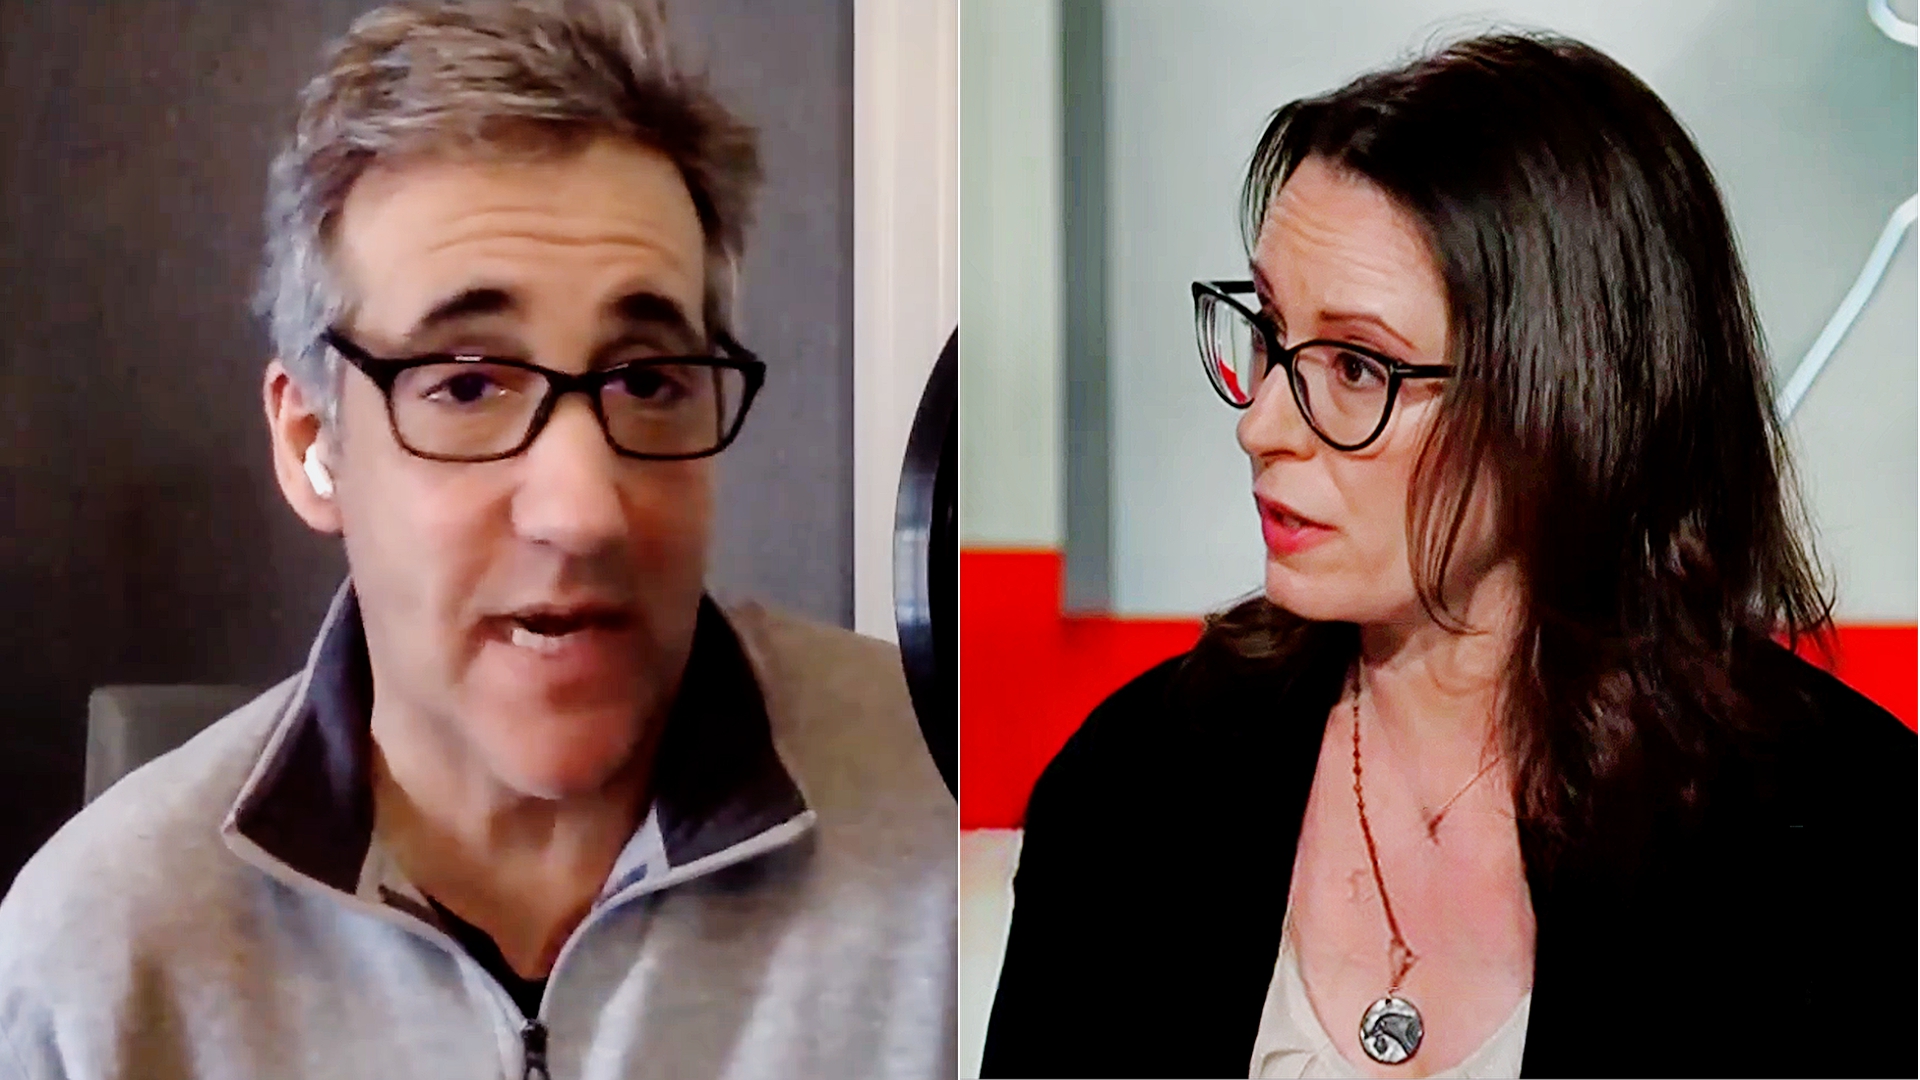 ‘Start Writing’: See Cohen Texts To Maggie Haberman From Bombshell Trump Trial Testimony